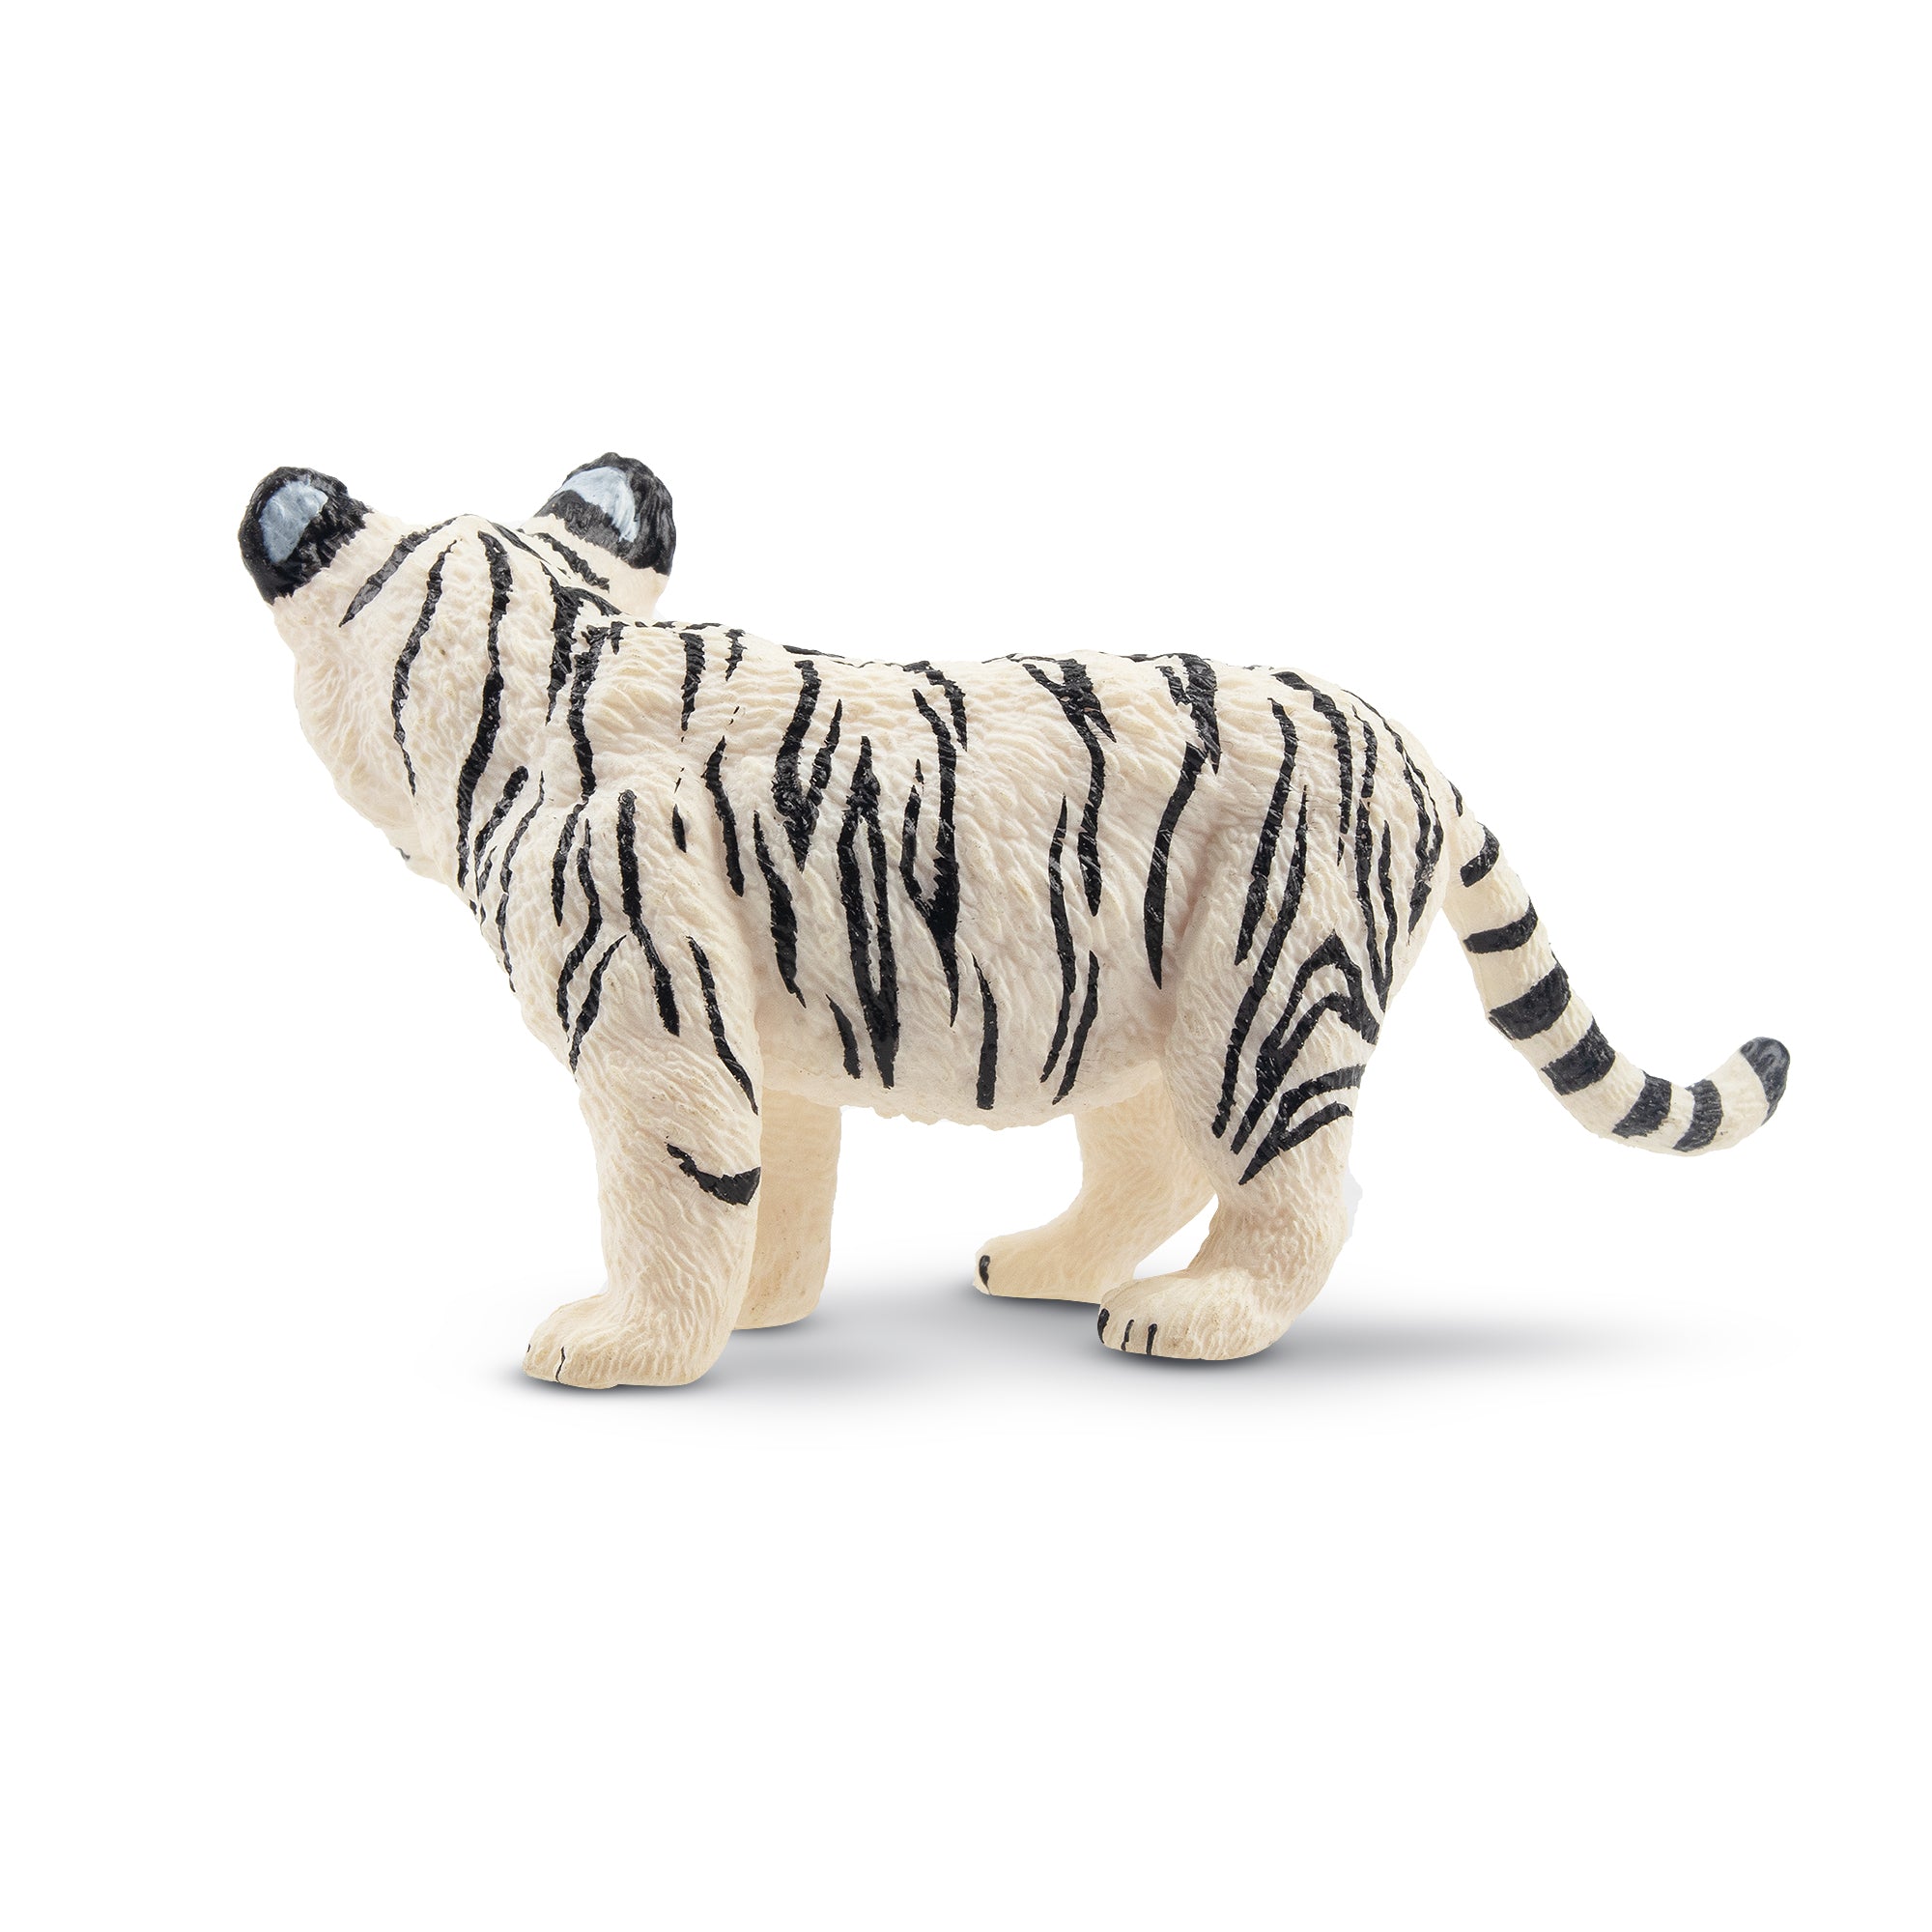 Toymany Standing White Tiger Cub Figurine Toy - 1-back